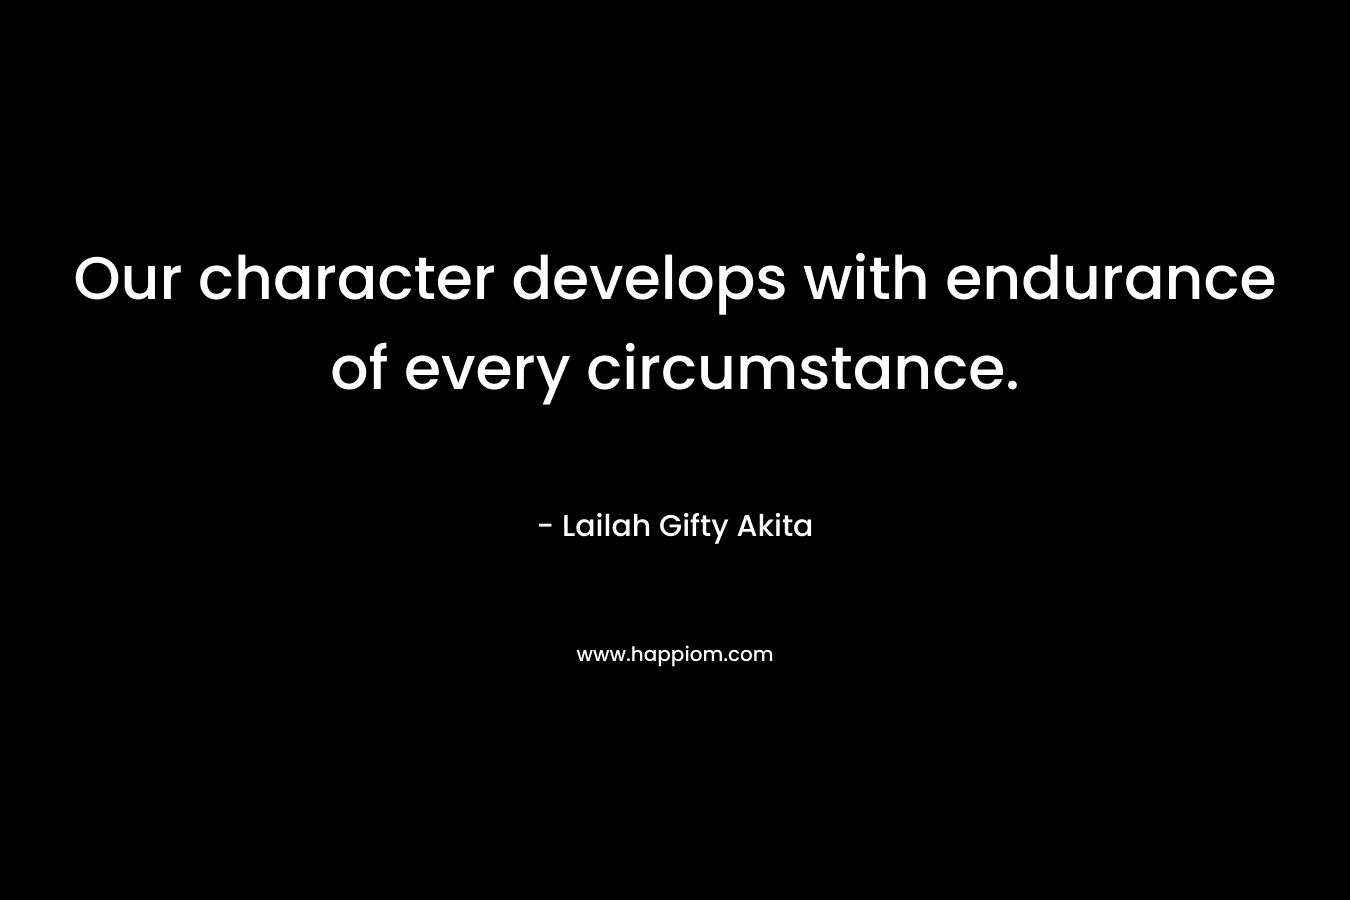 Our character develops with endurance of every circumstance.